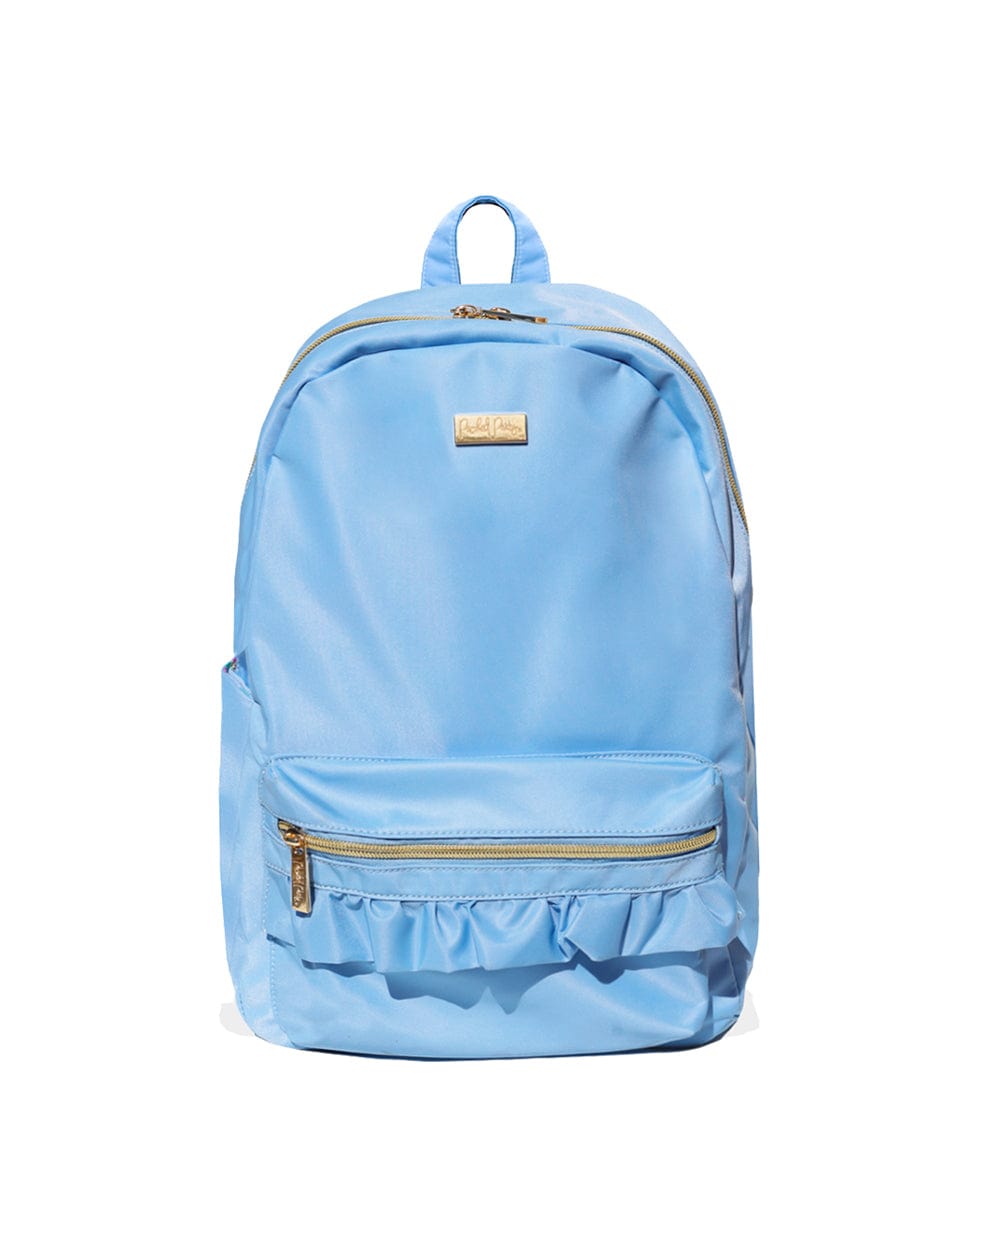 Your's Truly Light Ruffled Backpack | Packed Party